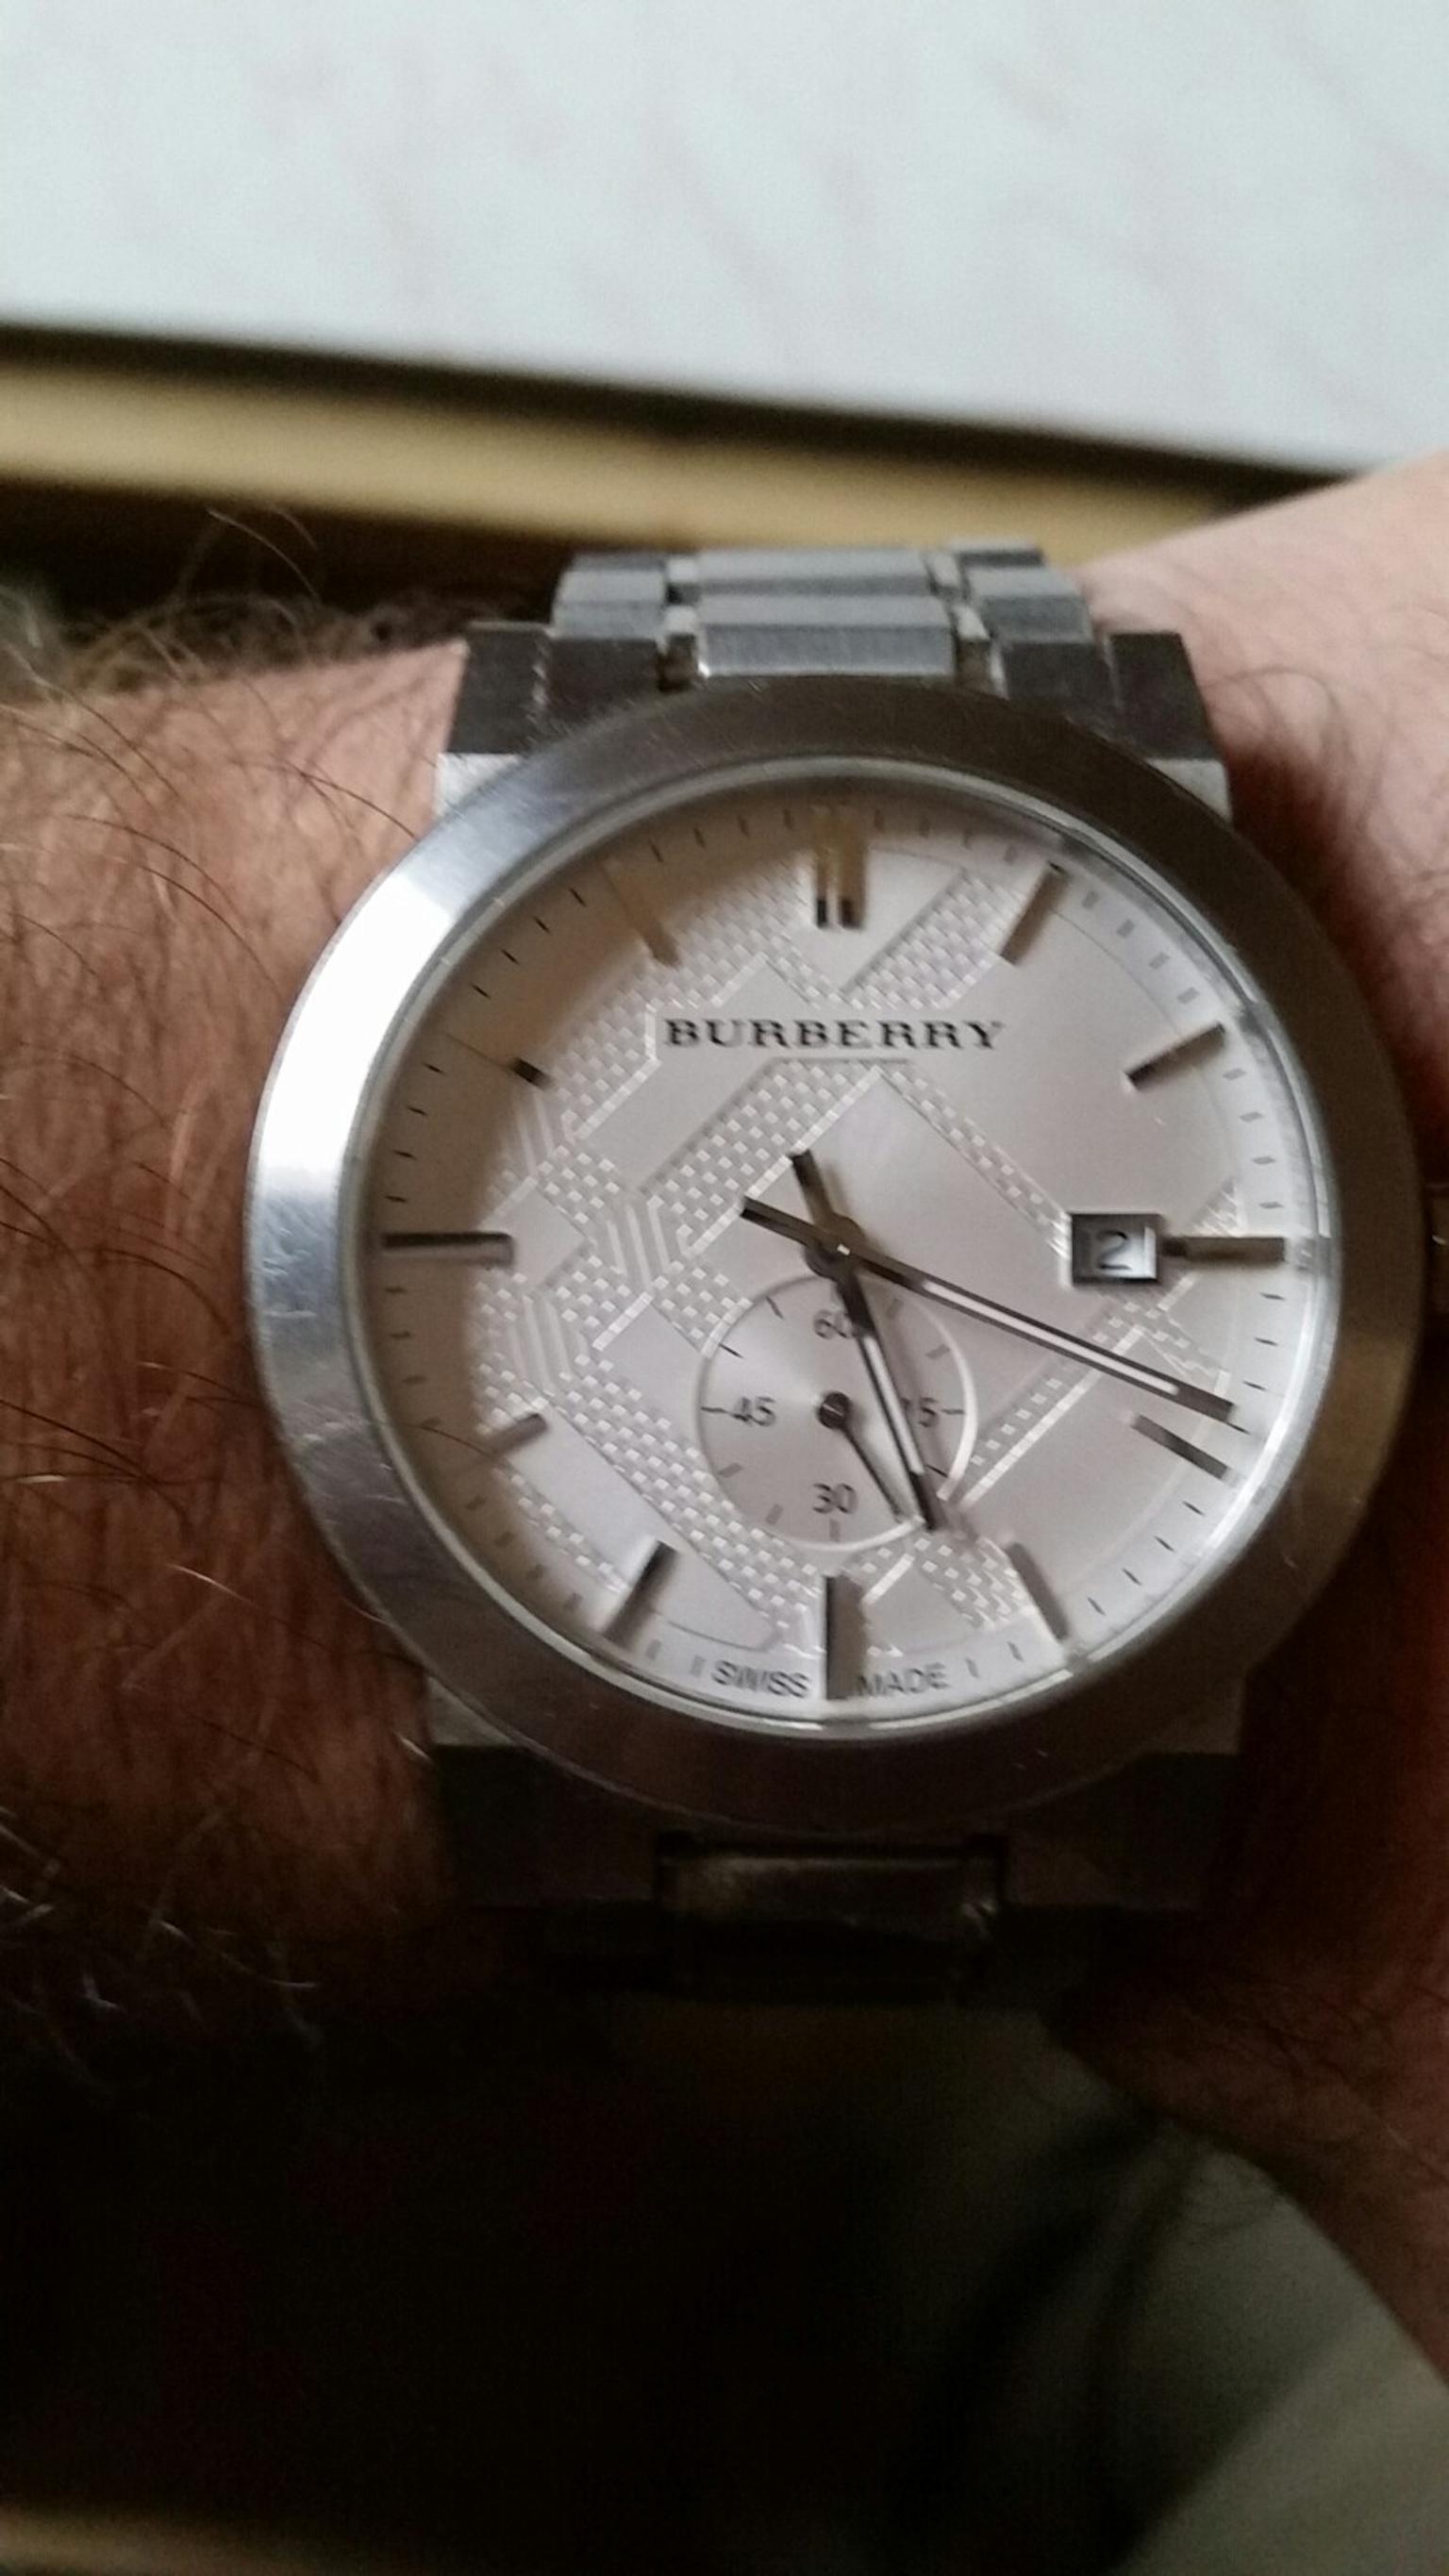 BURBERRY WATCH Sapphire crystal in B11 